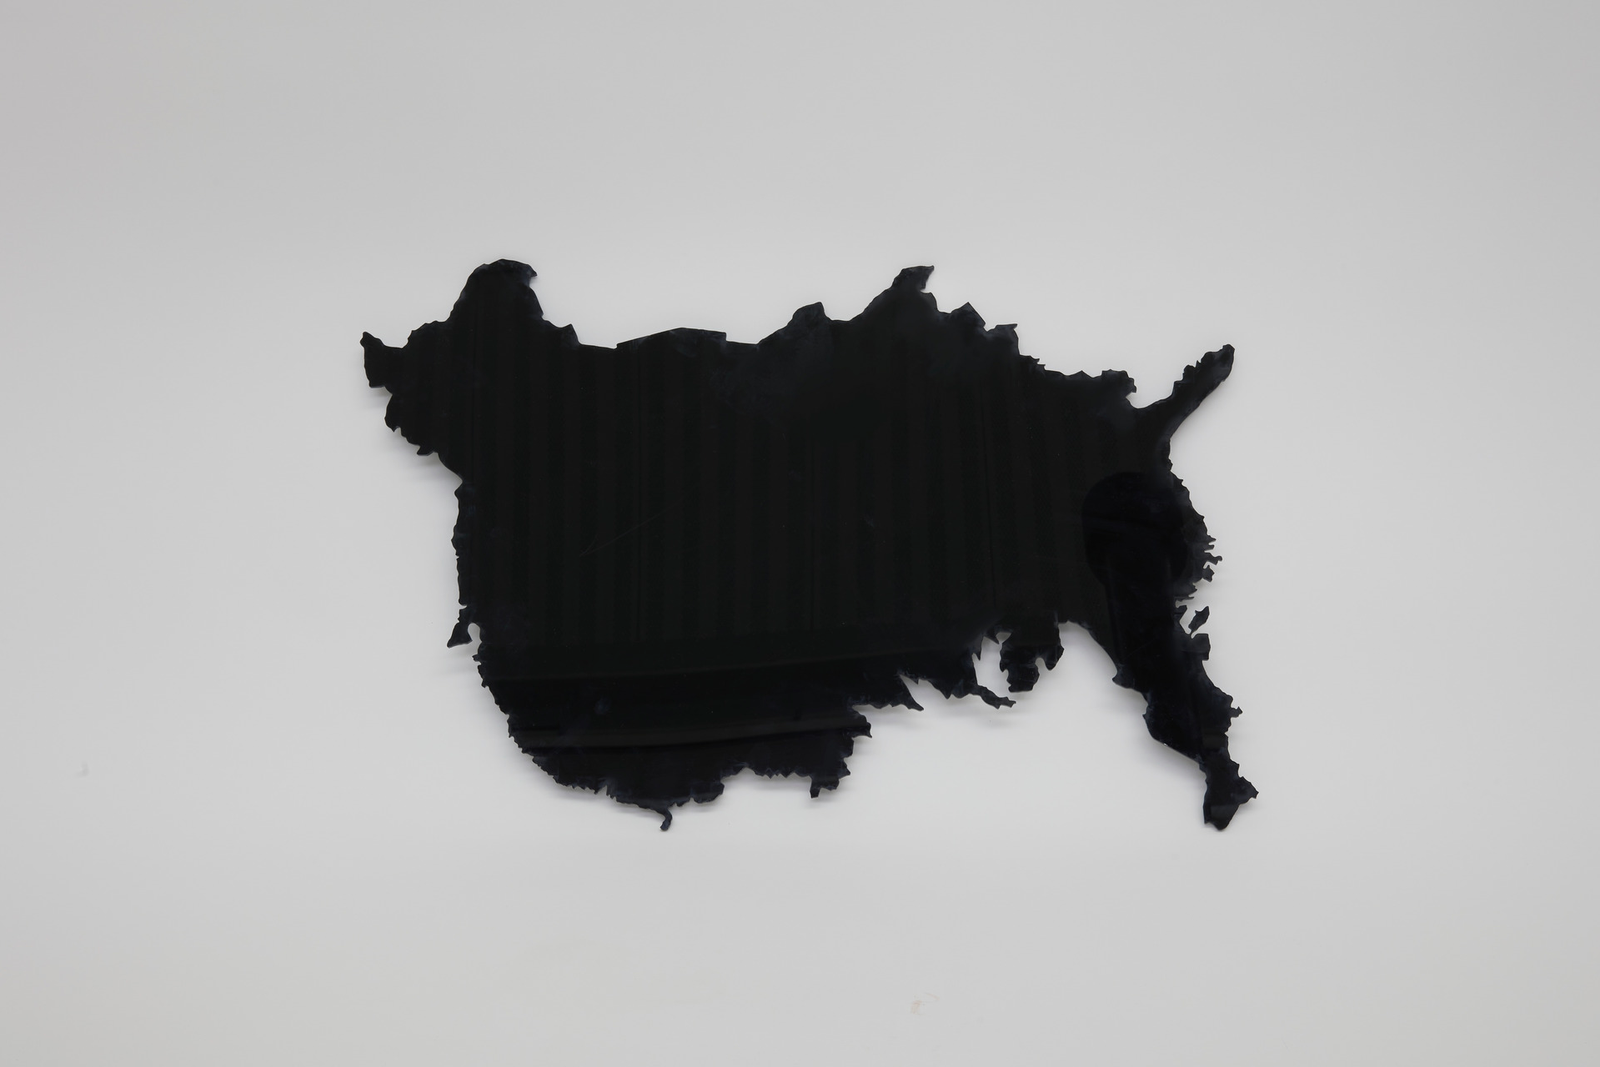 A black acrylic sheet cut in the shape of the China and USA maps overlapped to create an ambiguous shape.